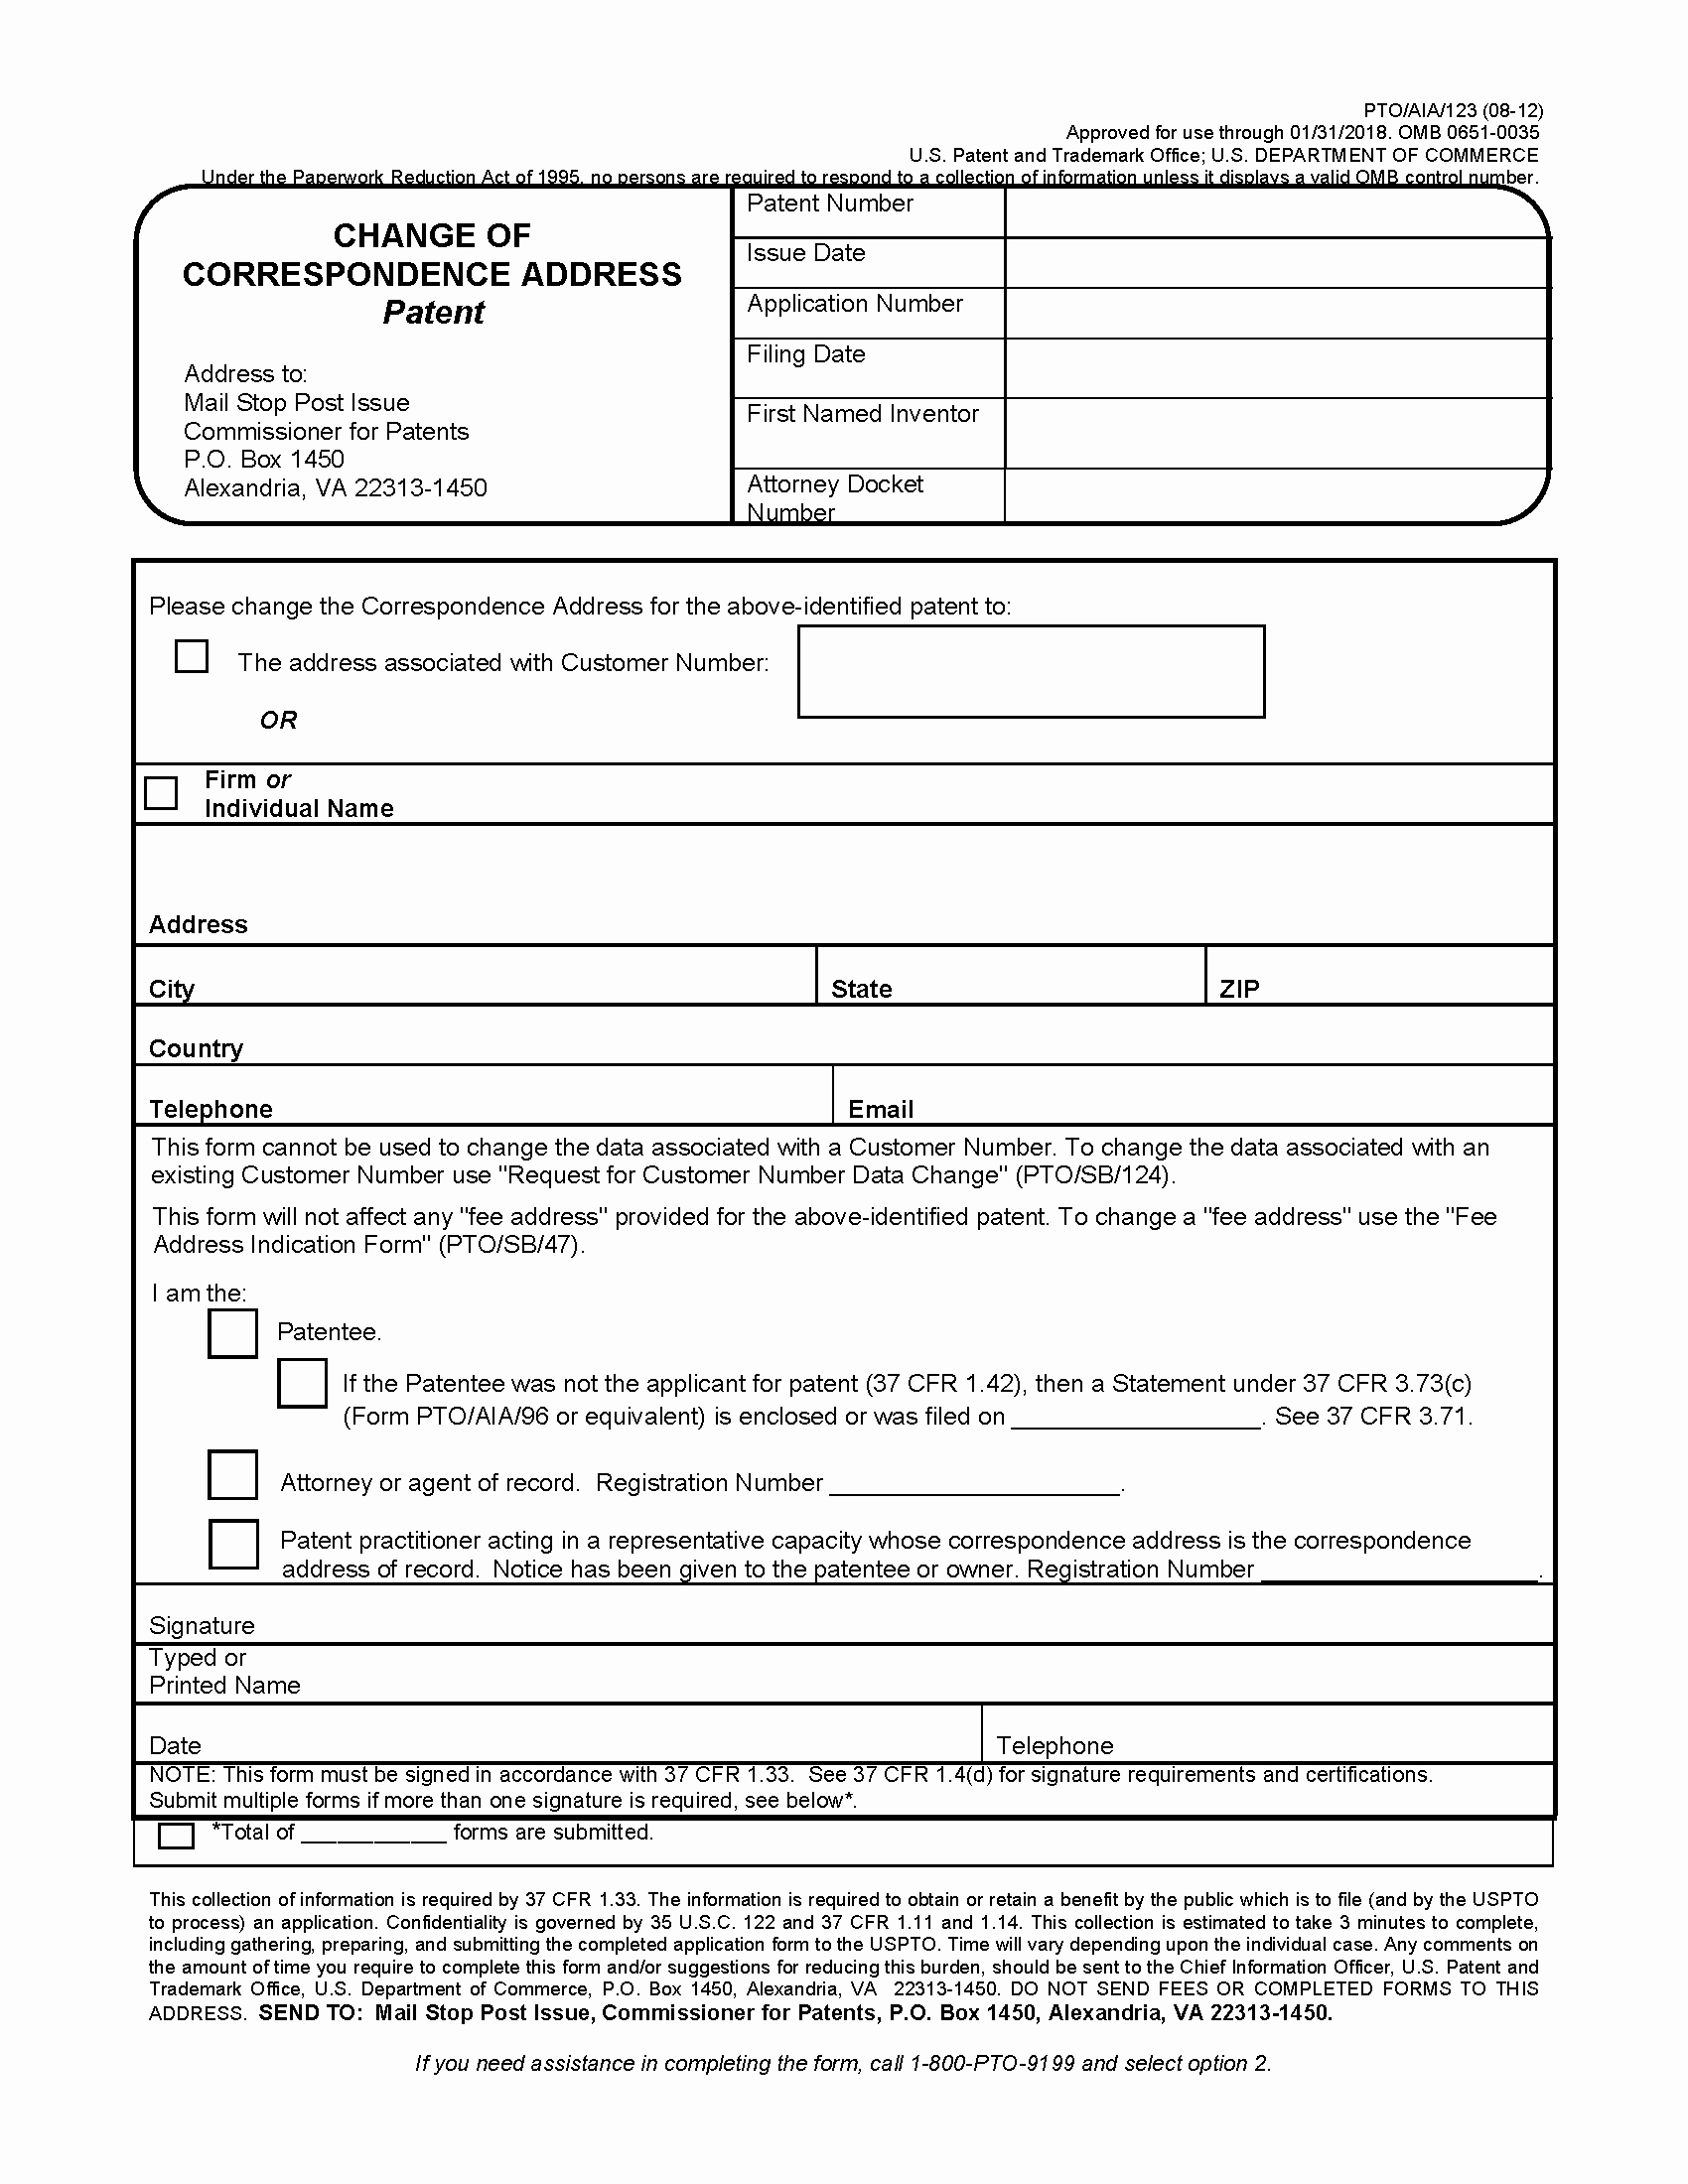 Provisional Patent Application form Lovely Mpep 601 03 A Change Of Correspondence Address In